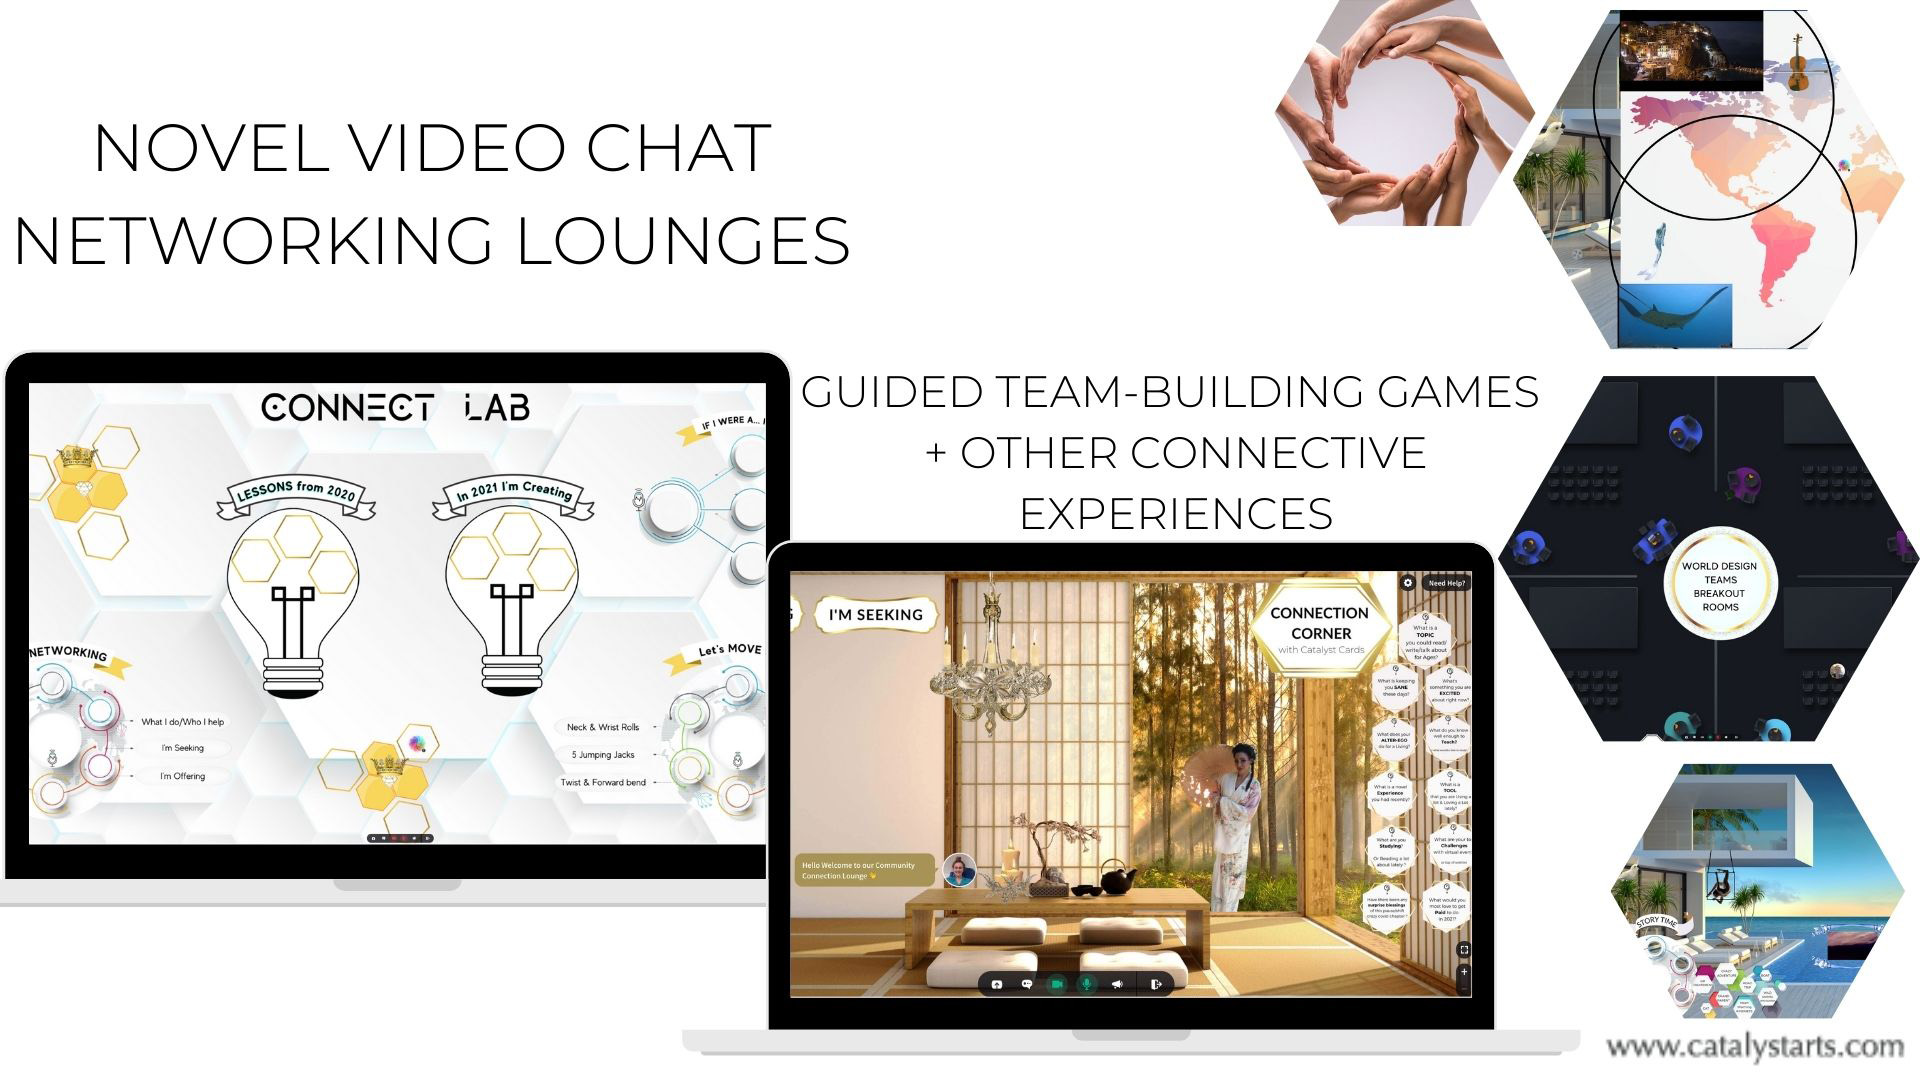 Virtual Networking Events, Games & Virtual Team Building by Catalyst Arts